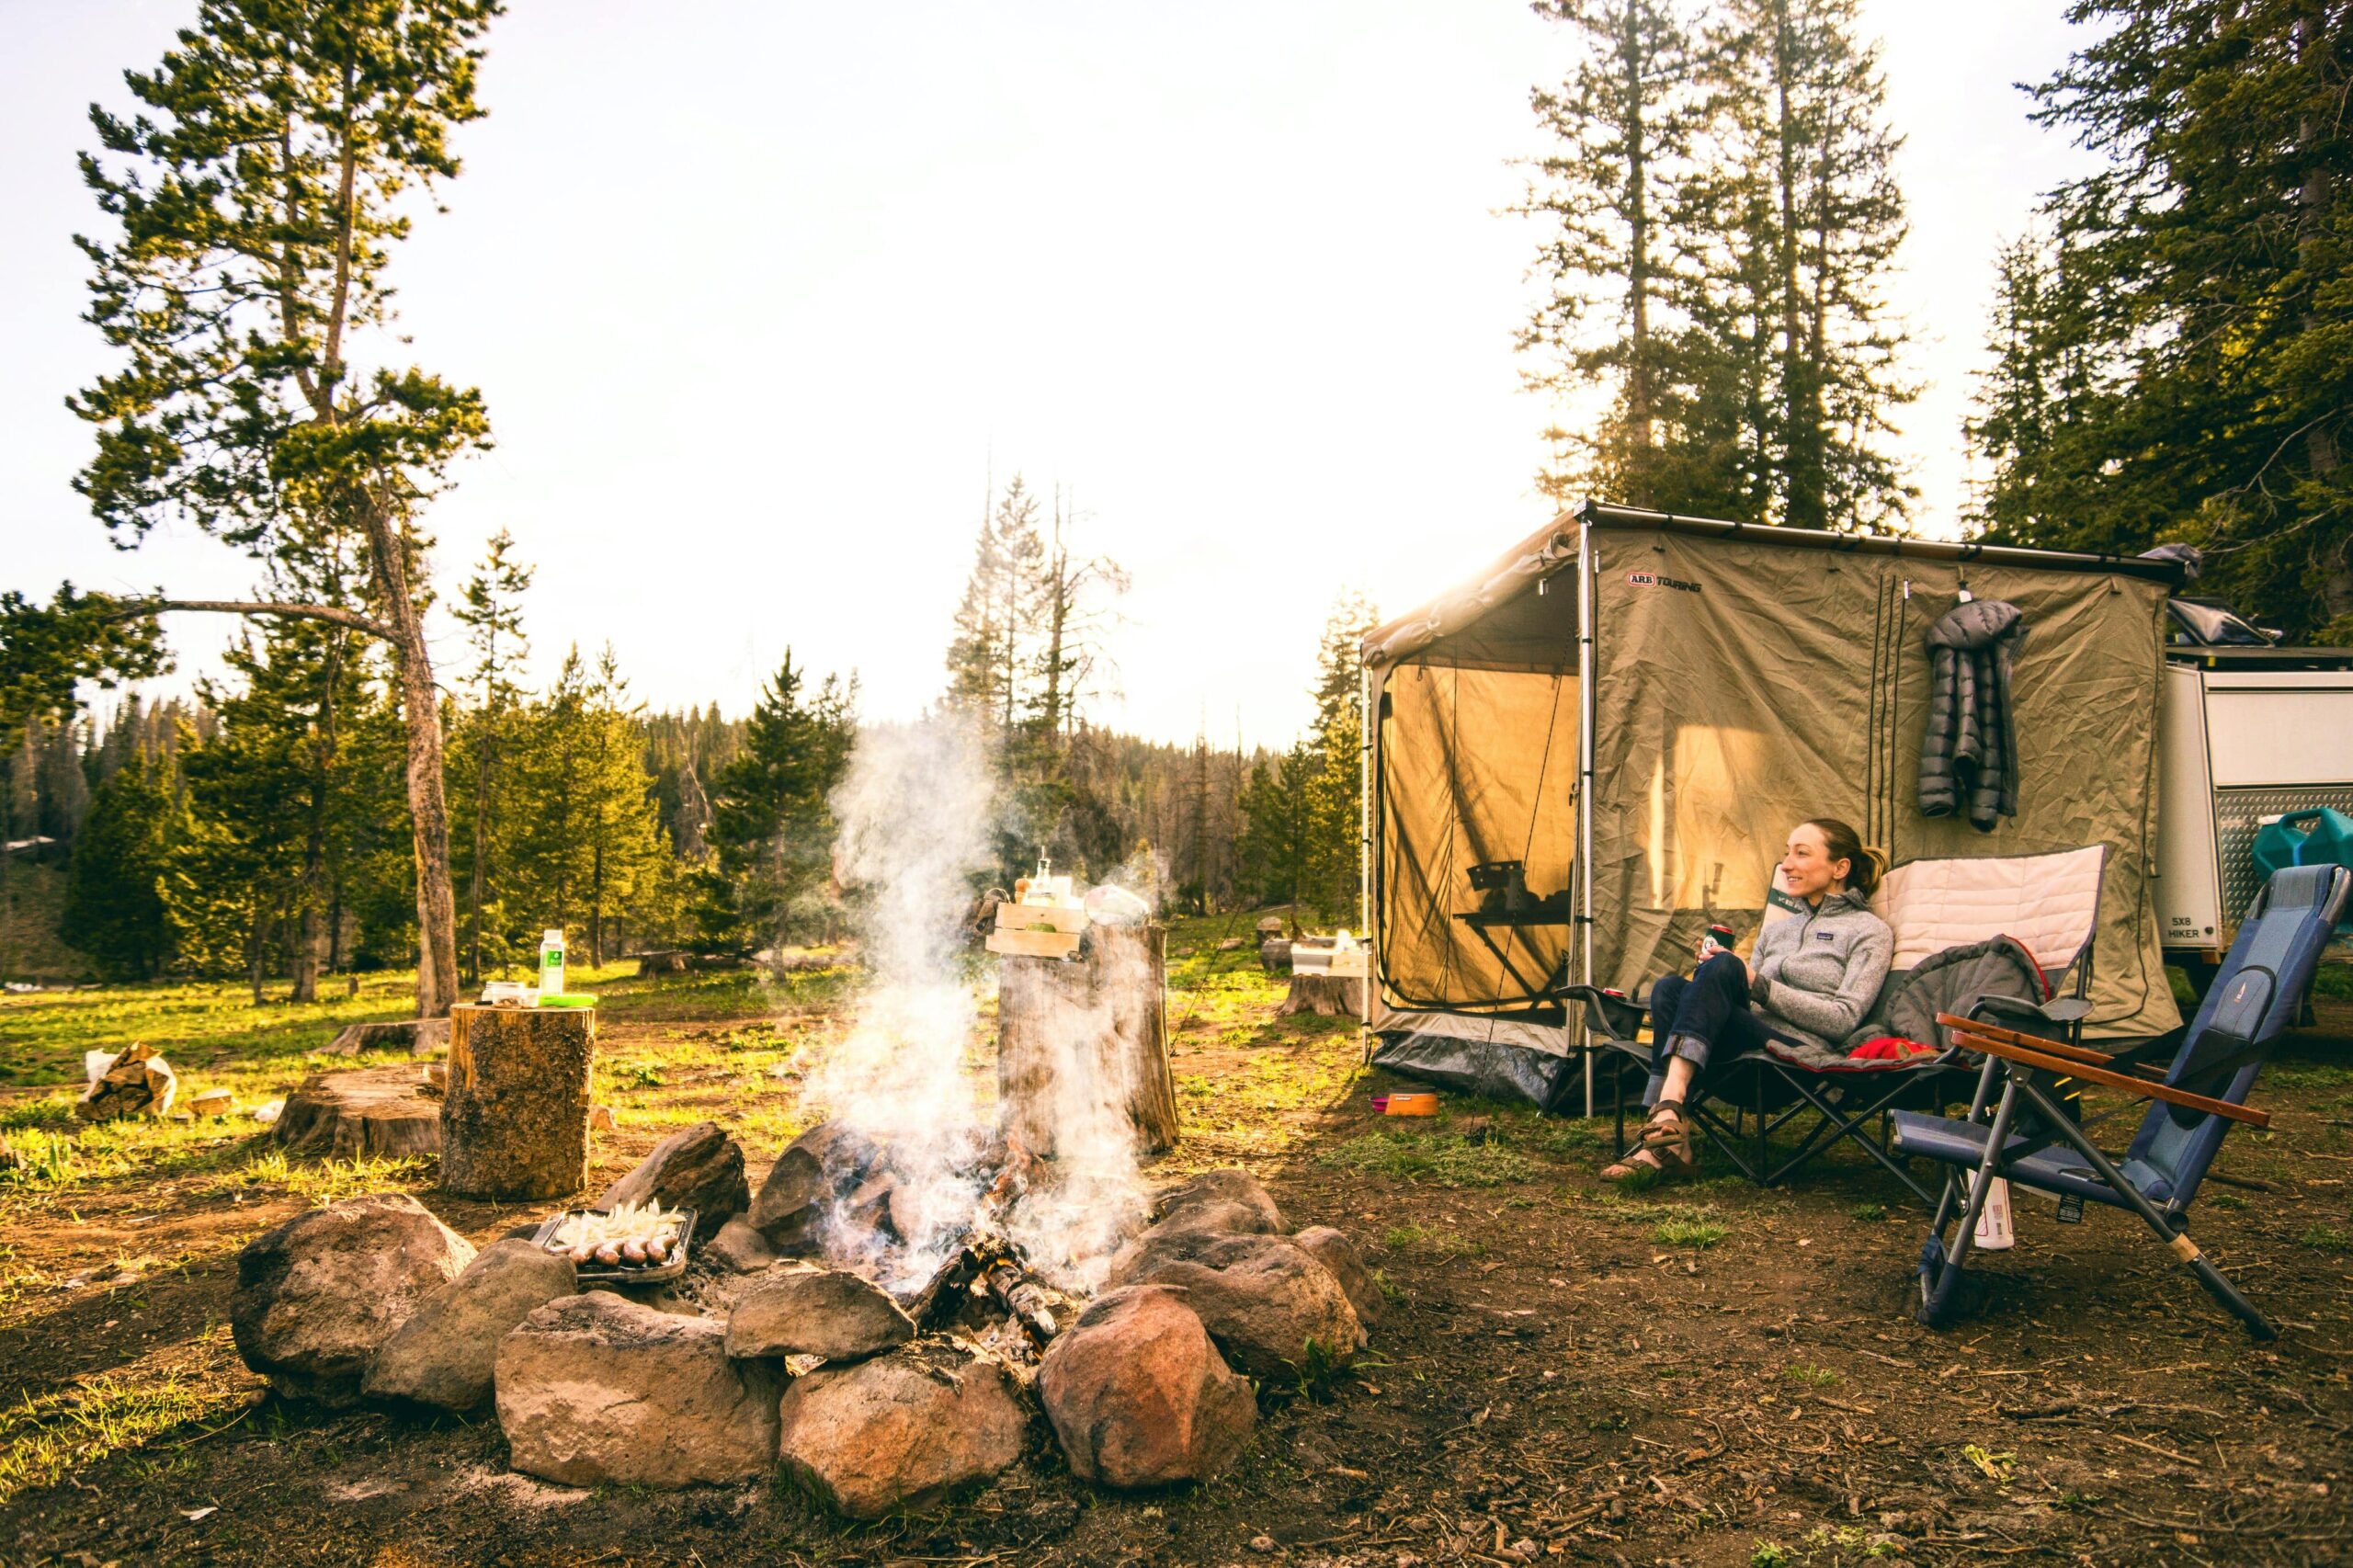 best strains, Embracing Nature: The Best Strains of Weed to Take Camping